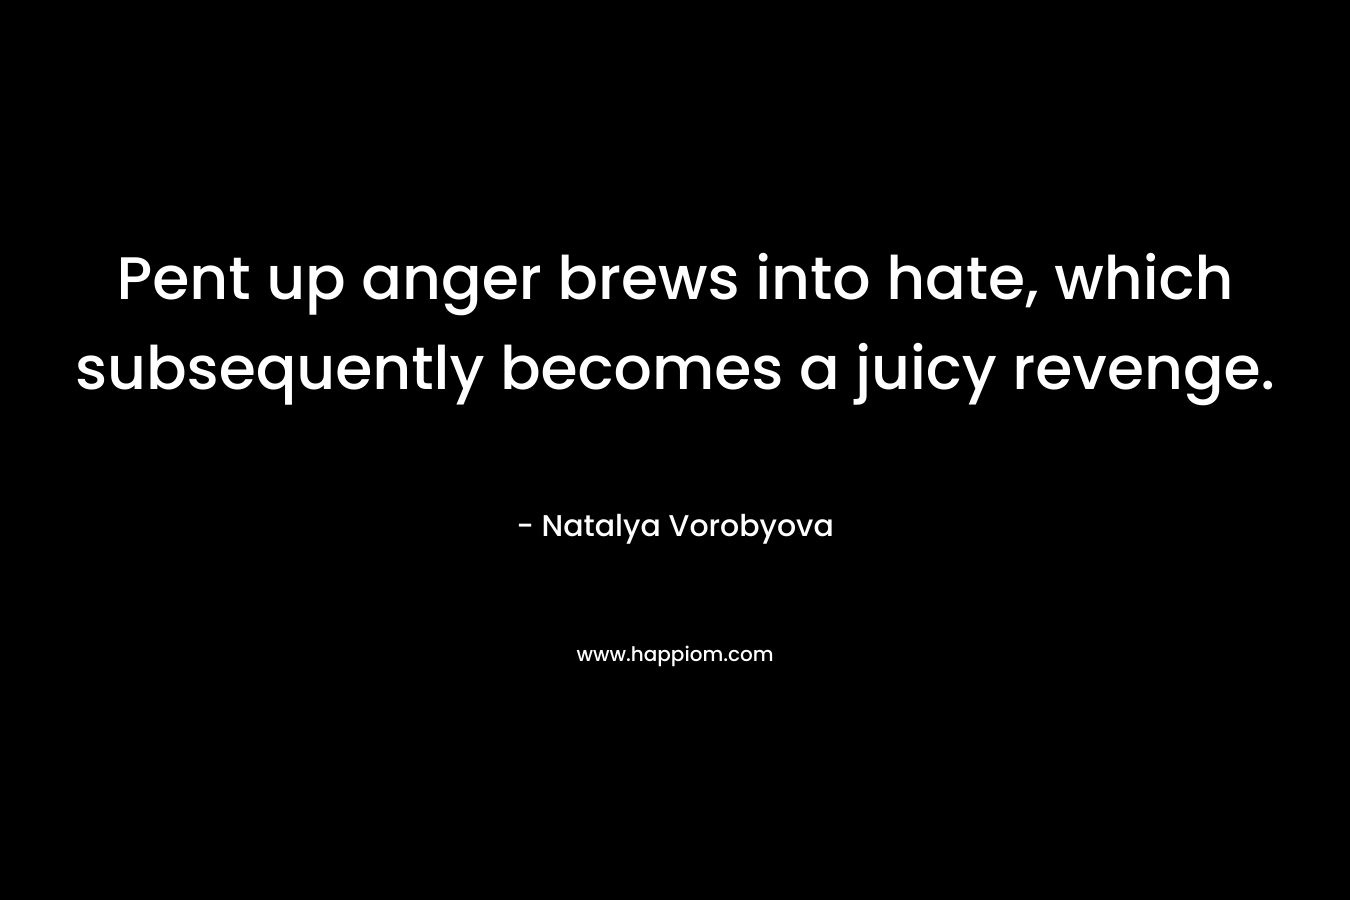 Pent up anger brews into hate, which subsequently becomes a juicy revenge. – Natalya Vorobyova